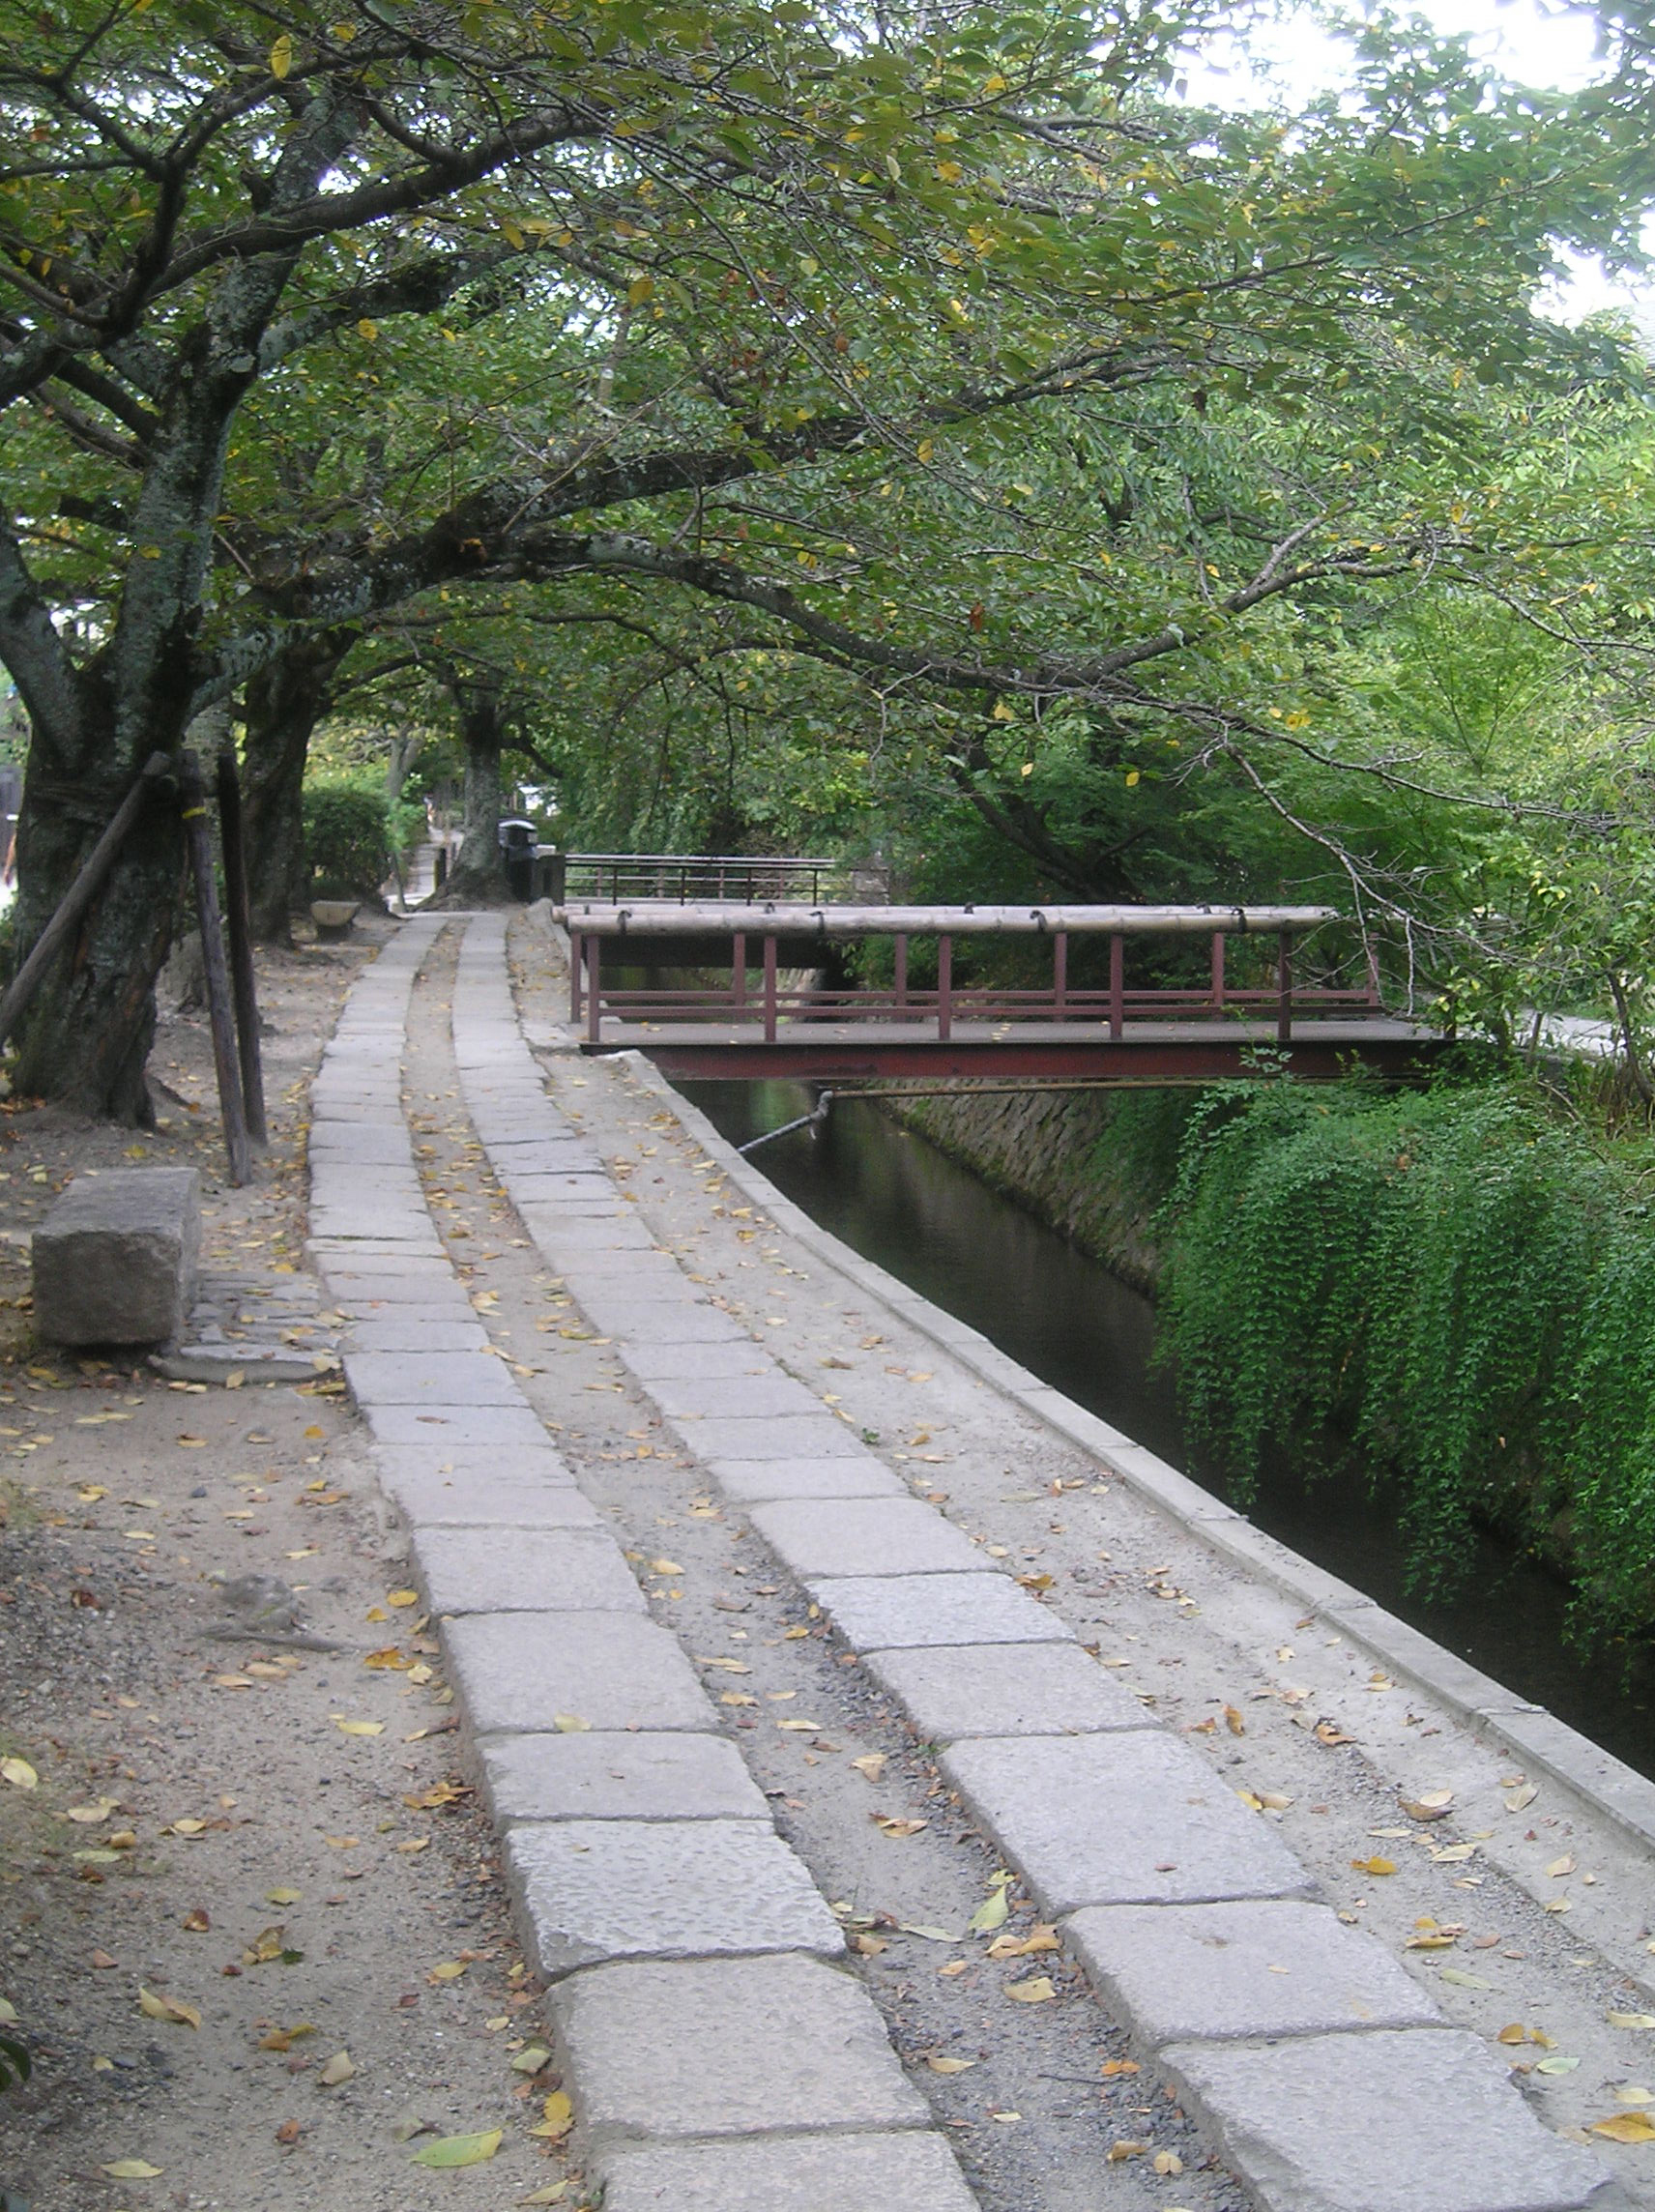 The Philosophers' Path in Kyoto